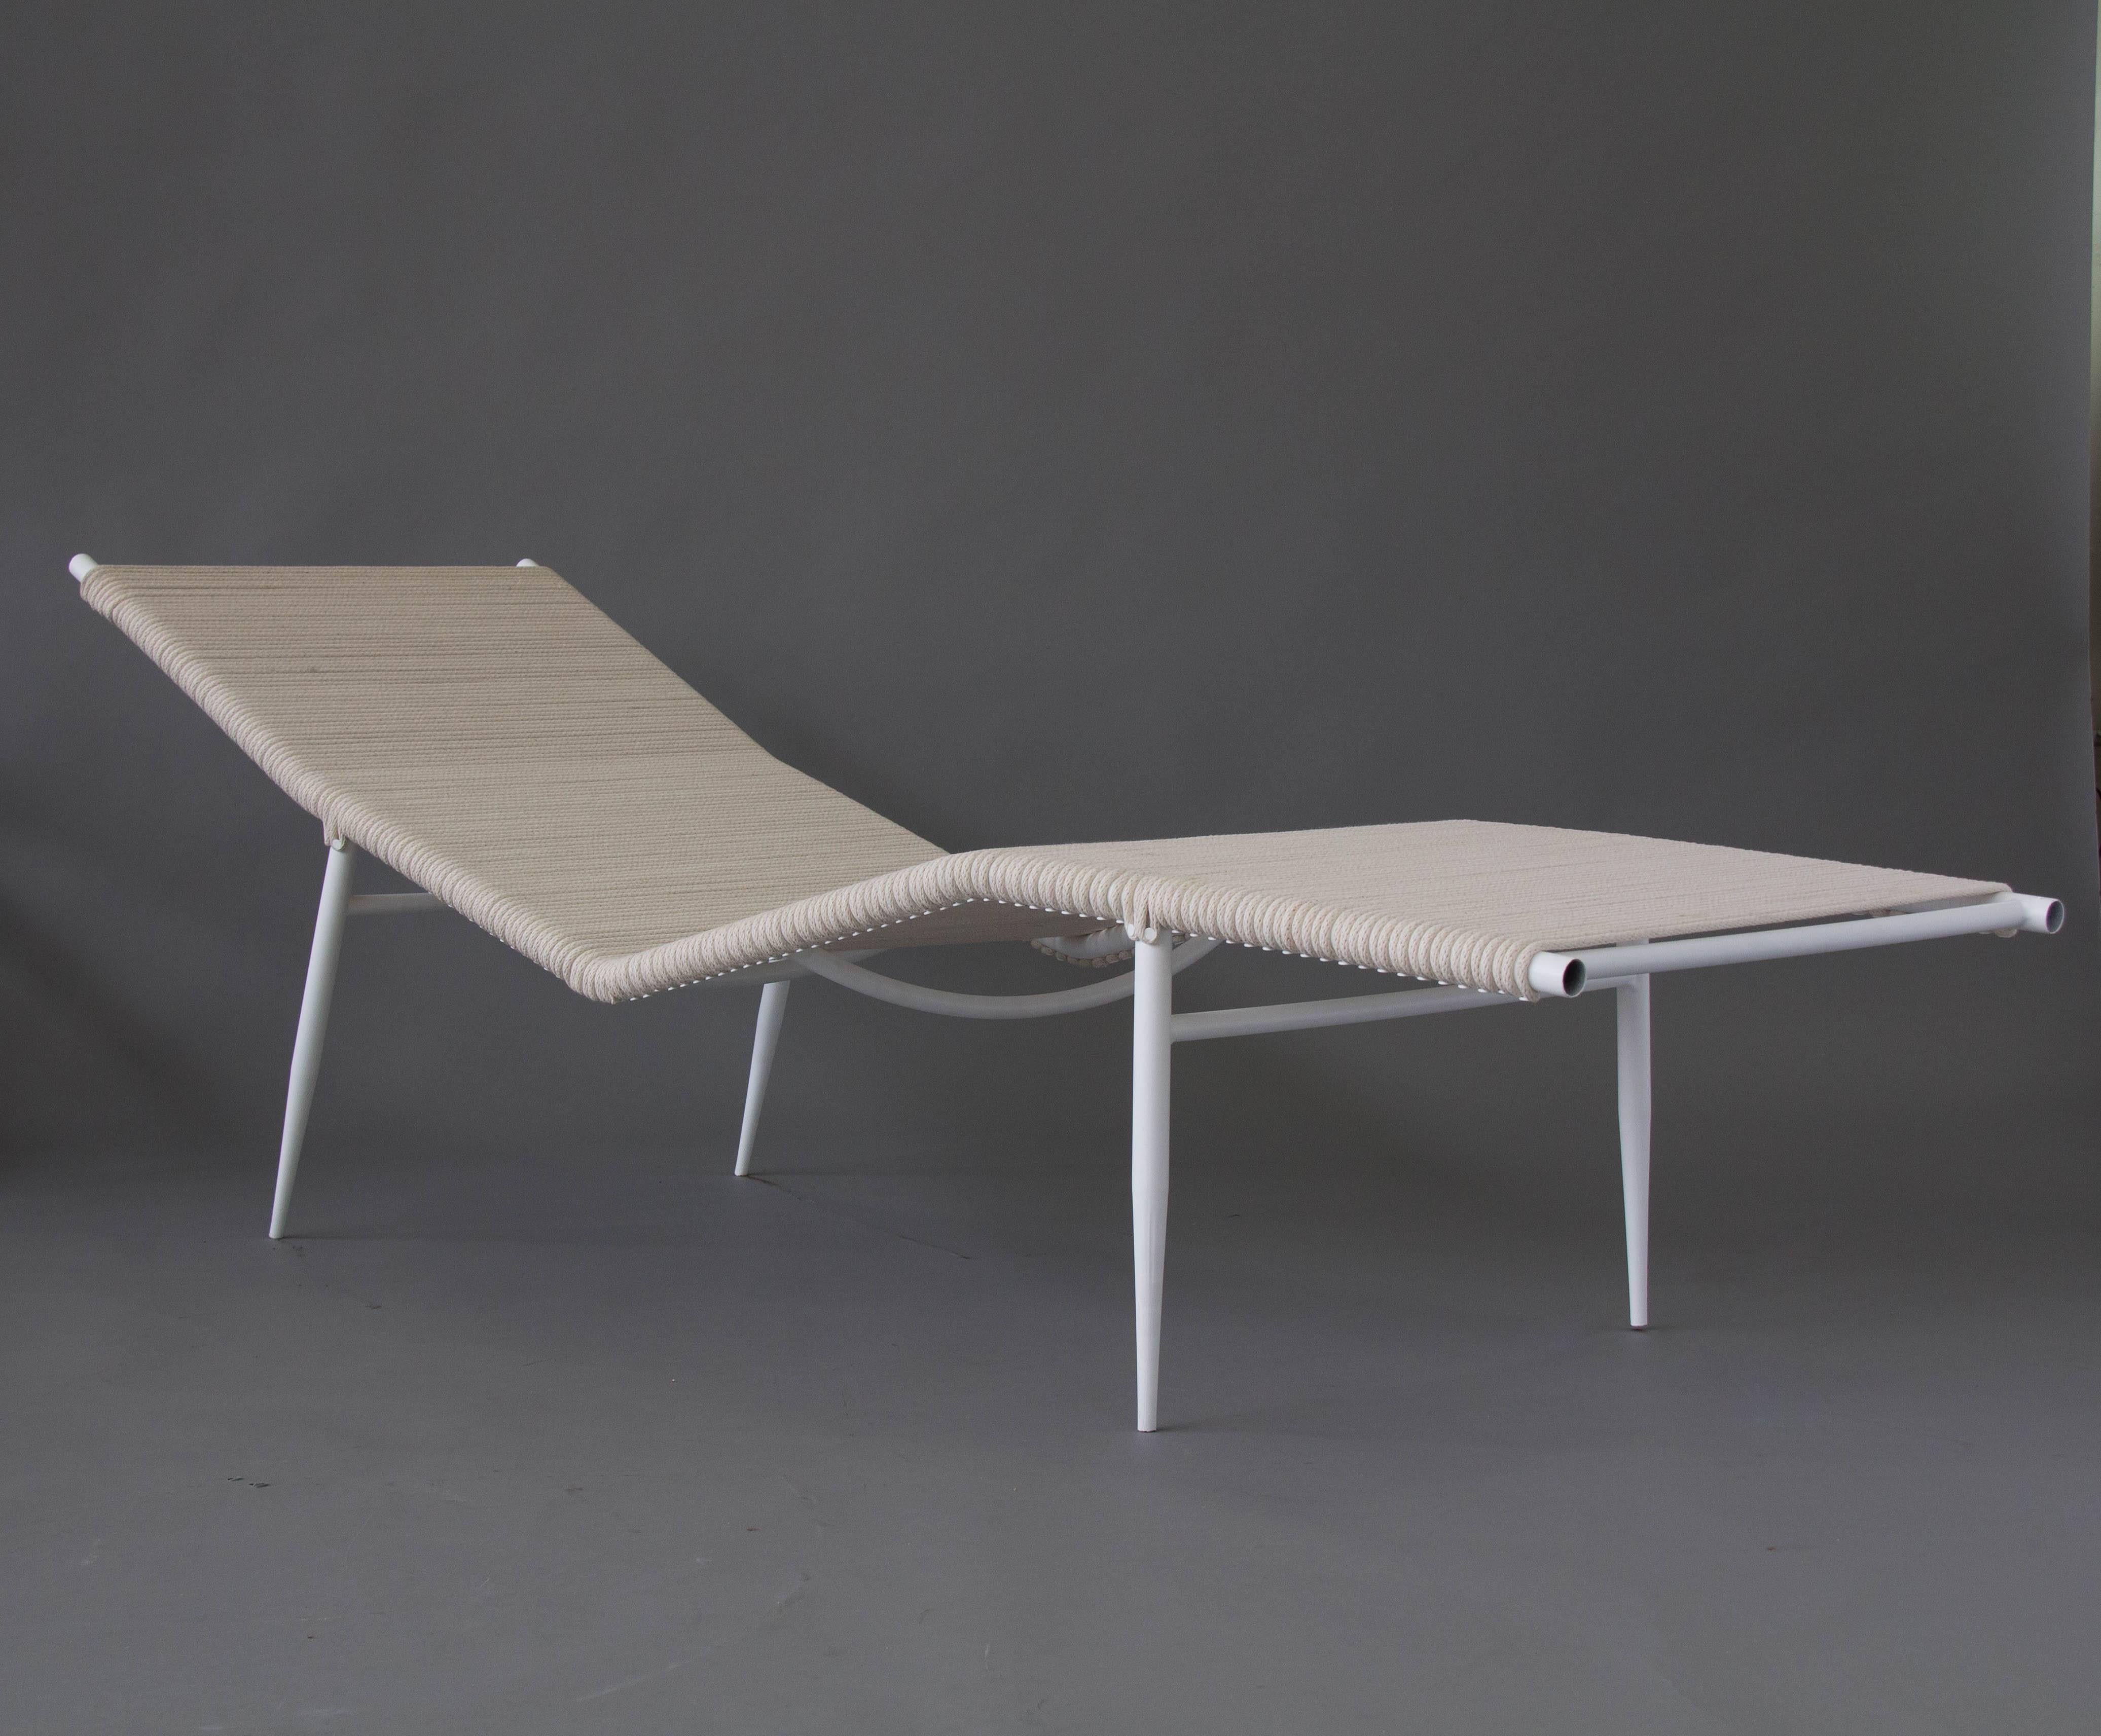 American Modernist Patio Chaise Lounge with Rope Seat by Mallin